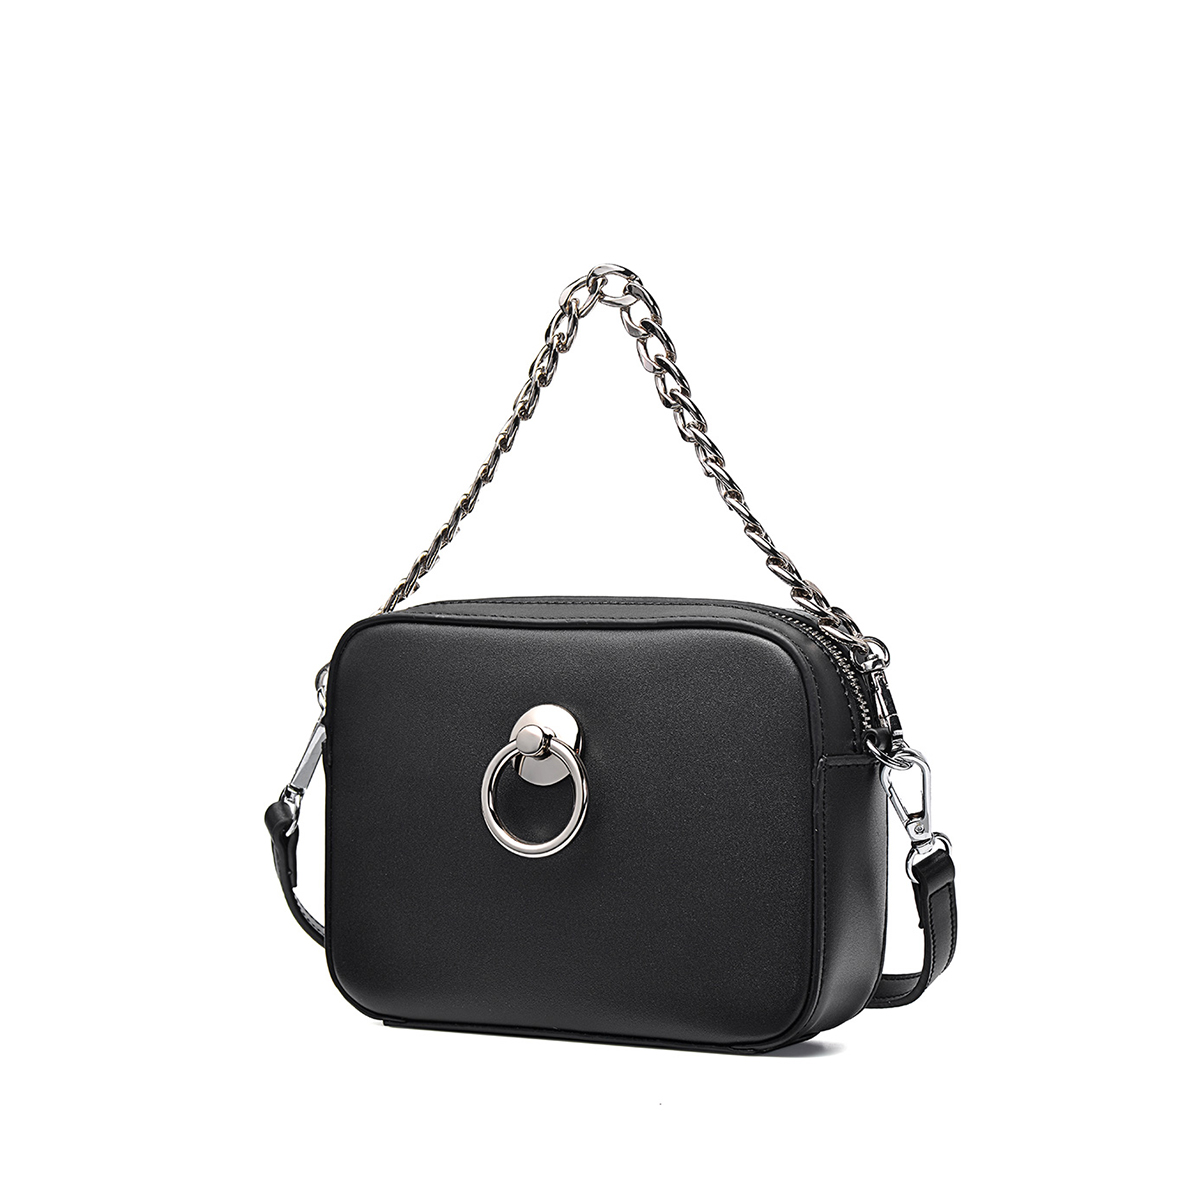 134bag:New Casual Female Handbags High Quality And Durable Female Shoulder Bags 